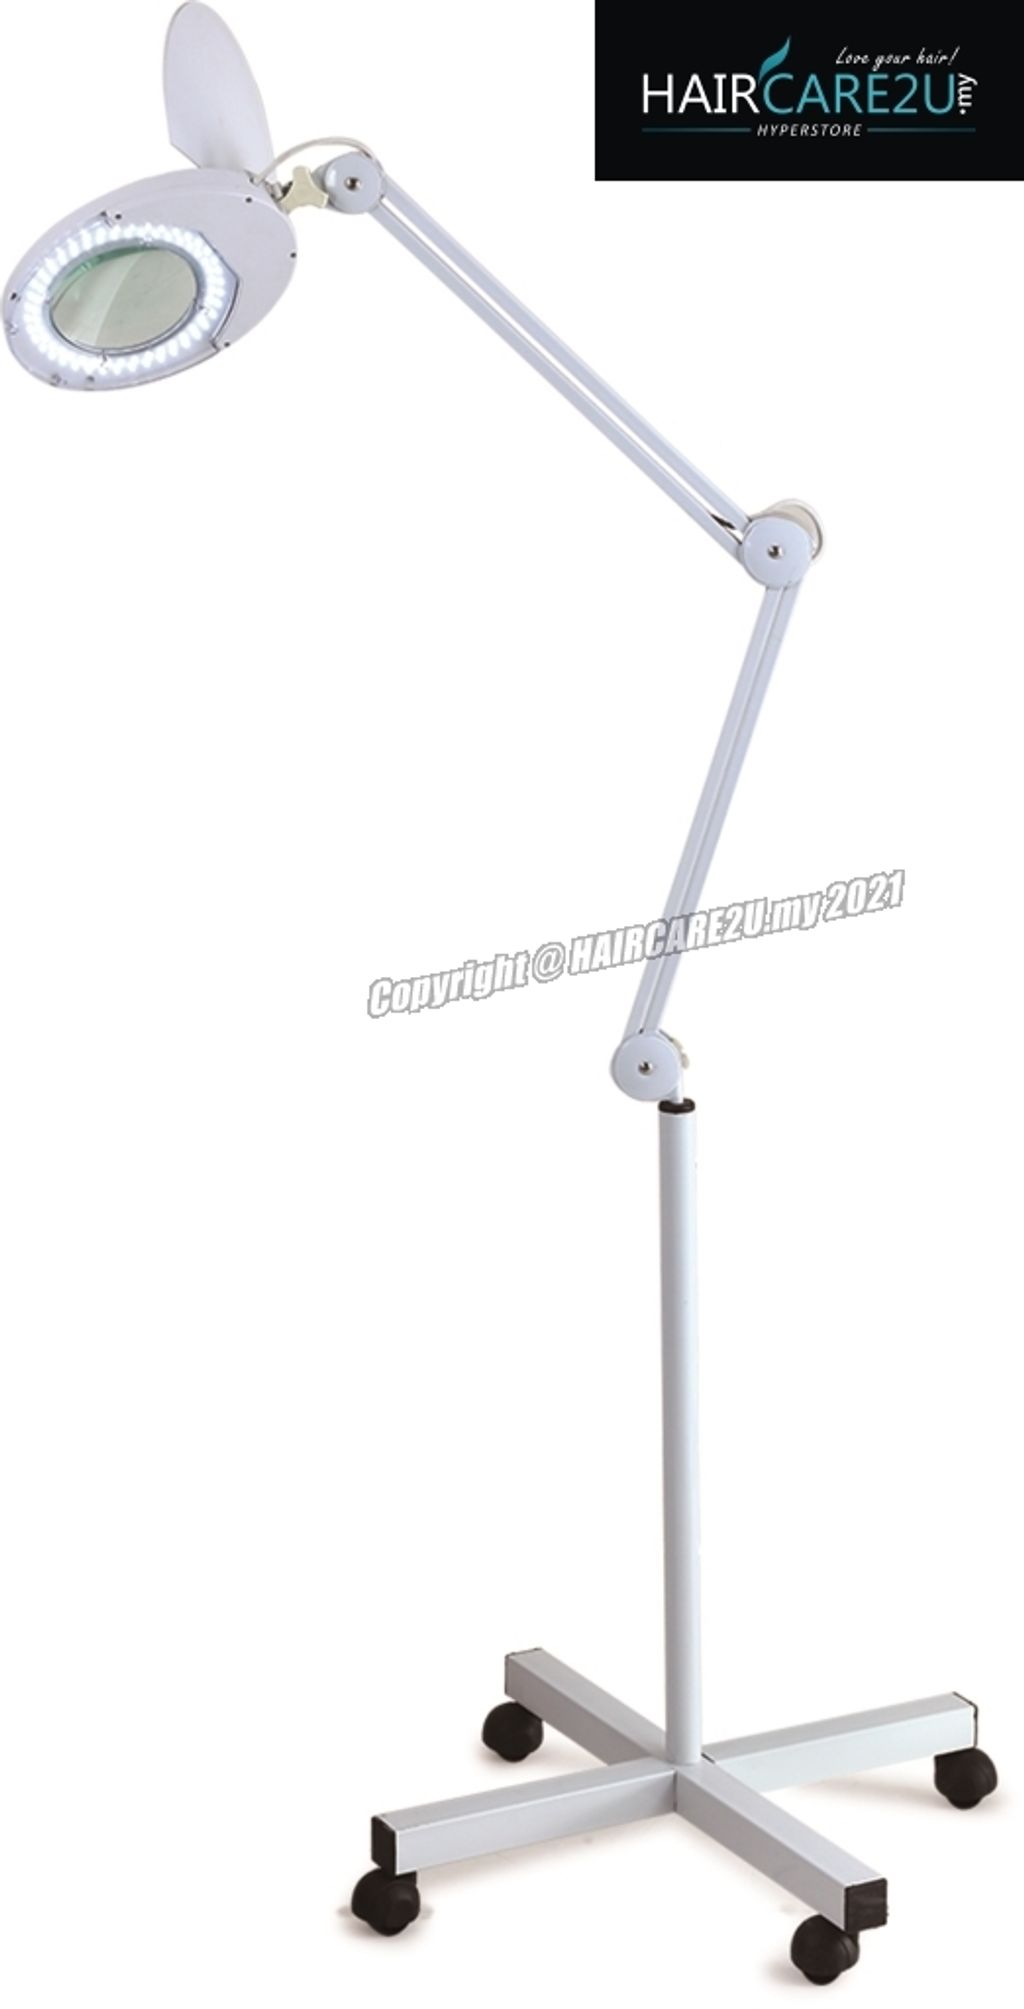 HD-6808 LED Magnifying Lamp for Scalp Care & Facial Care.jpg